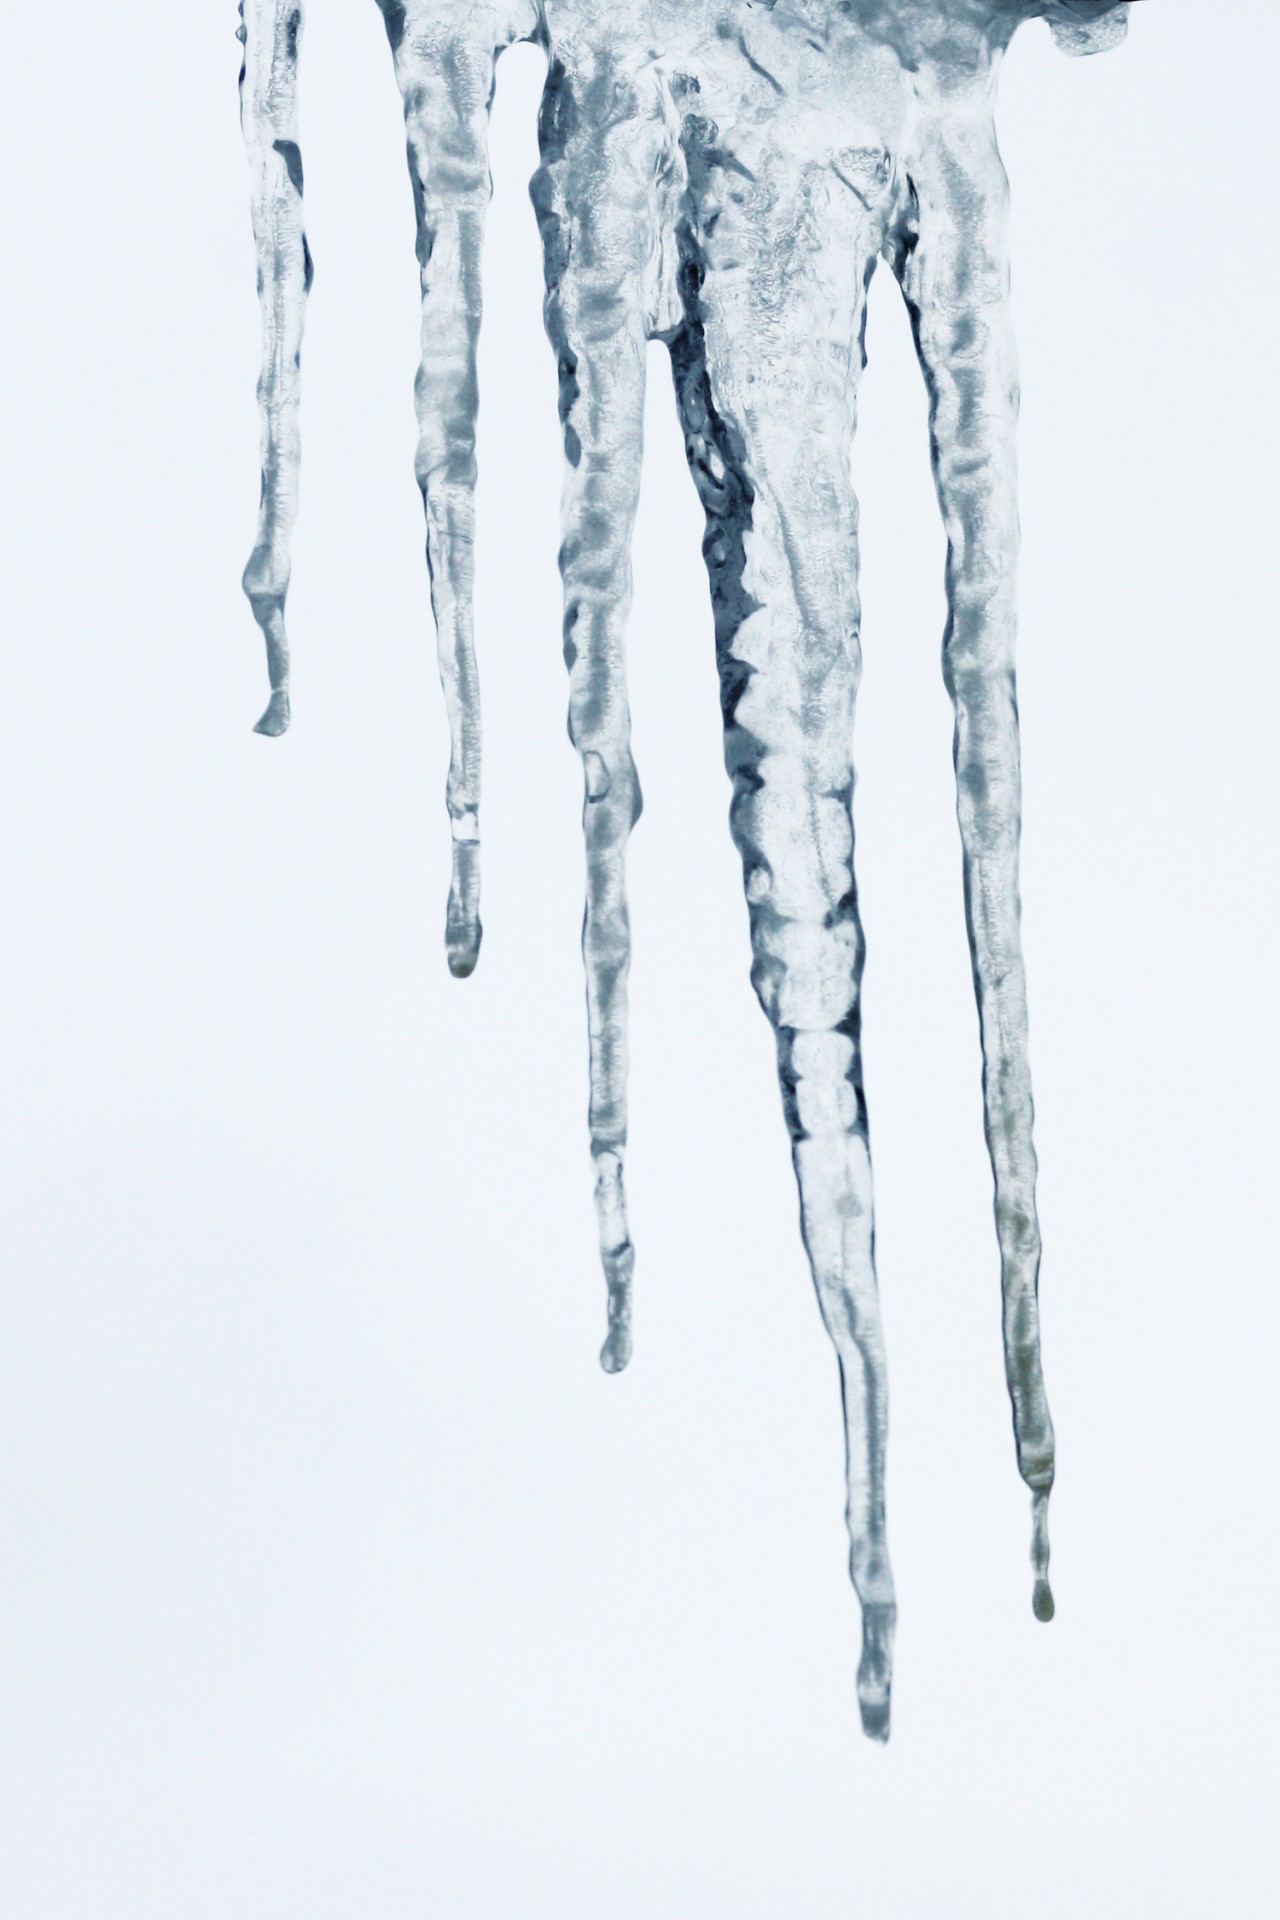 icicles winter cold free photo